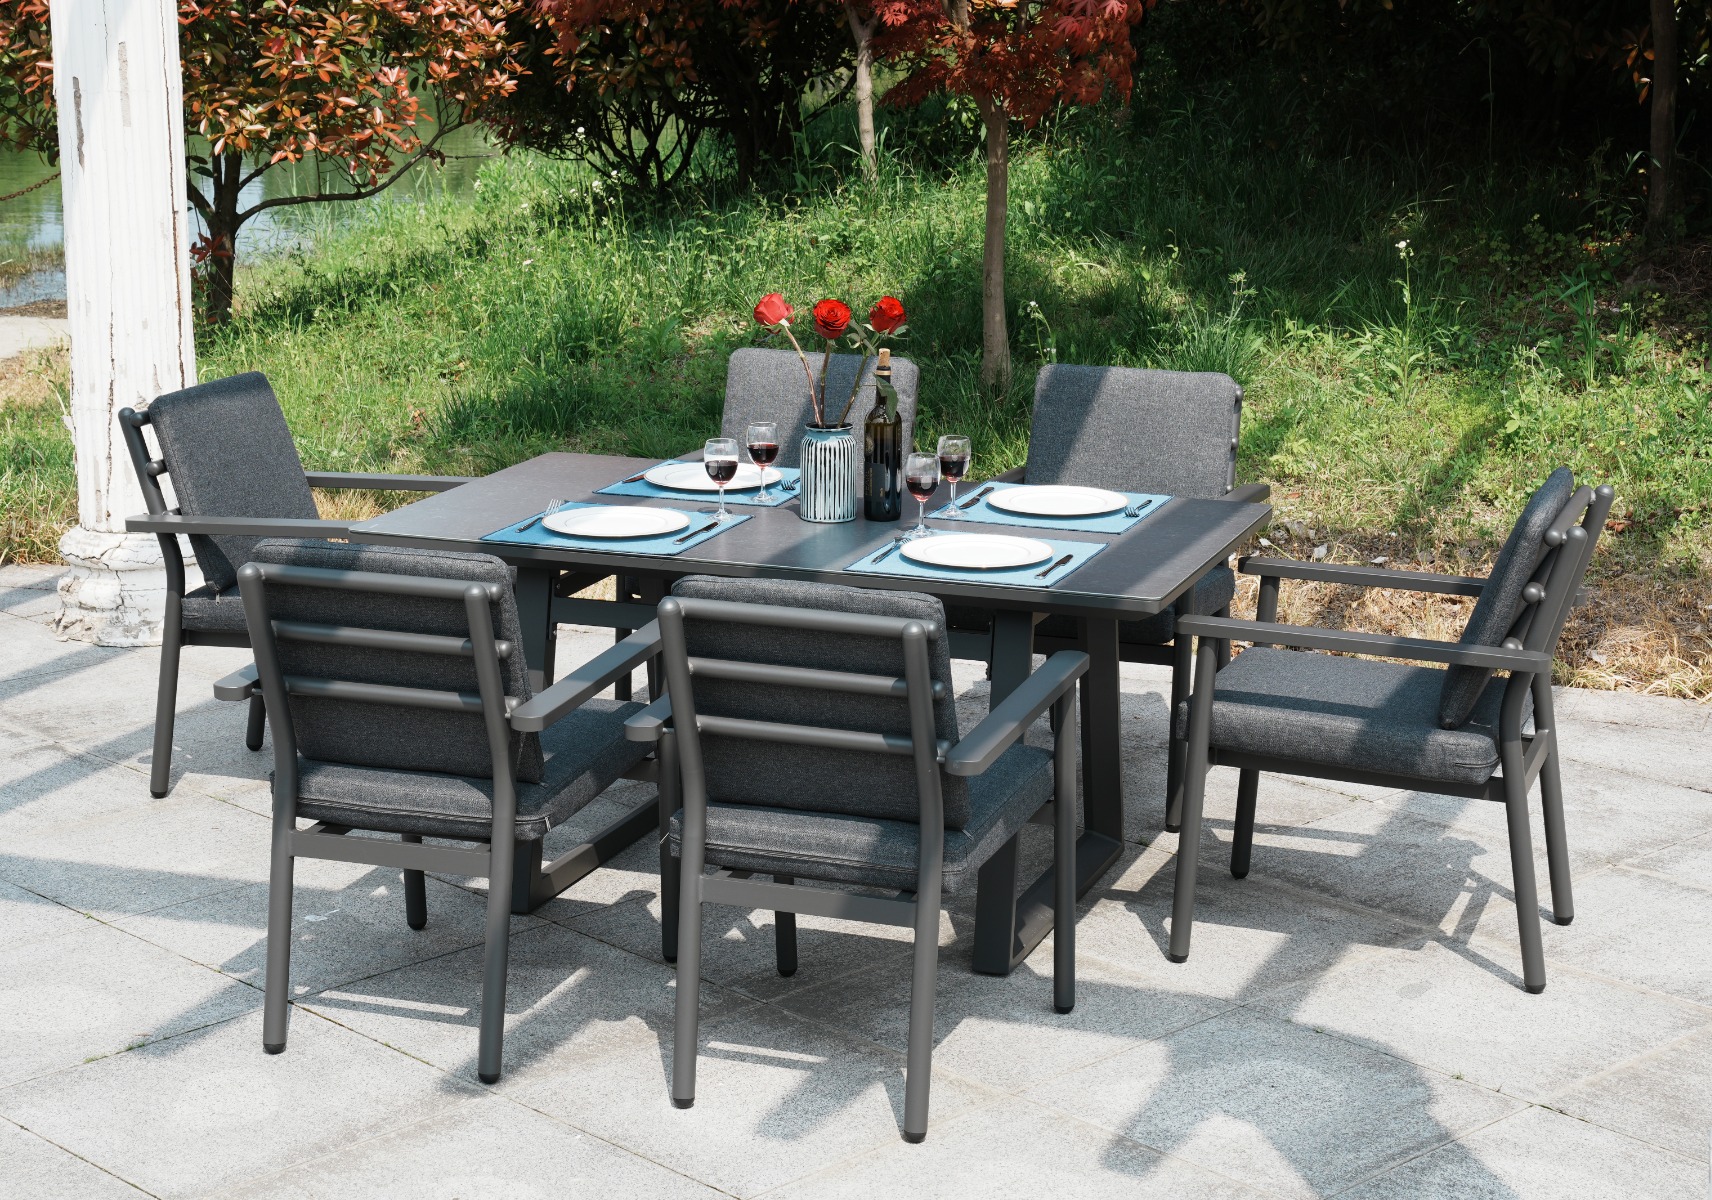 Deluxe Aluminium 6 Seat Dining Set with Grey Table Top